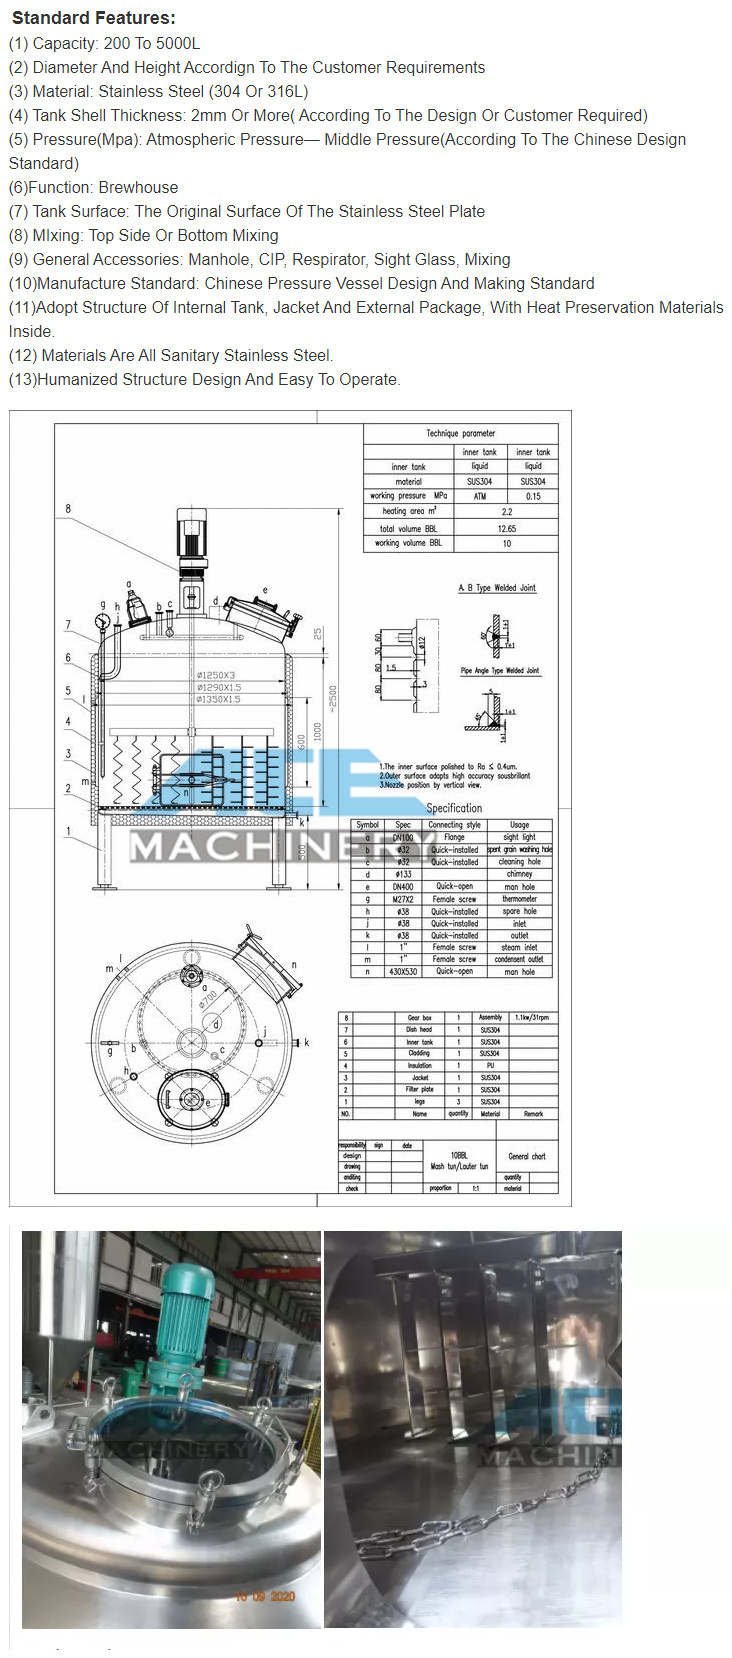 300L 500L 1000L Stainless Steel Fermentation Beer Brewery Equipment Micro Brewing Machine Turnkey Project /Fermenter Beer Equipment